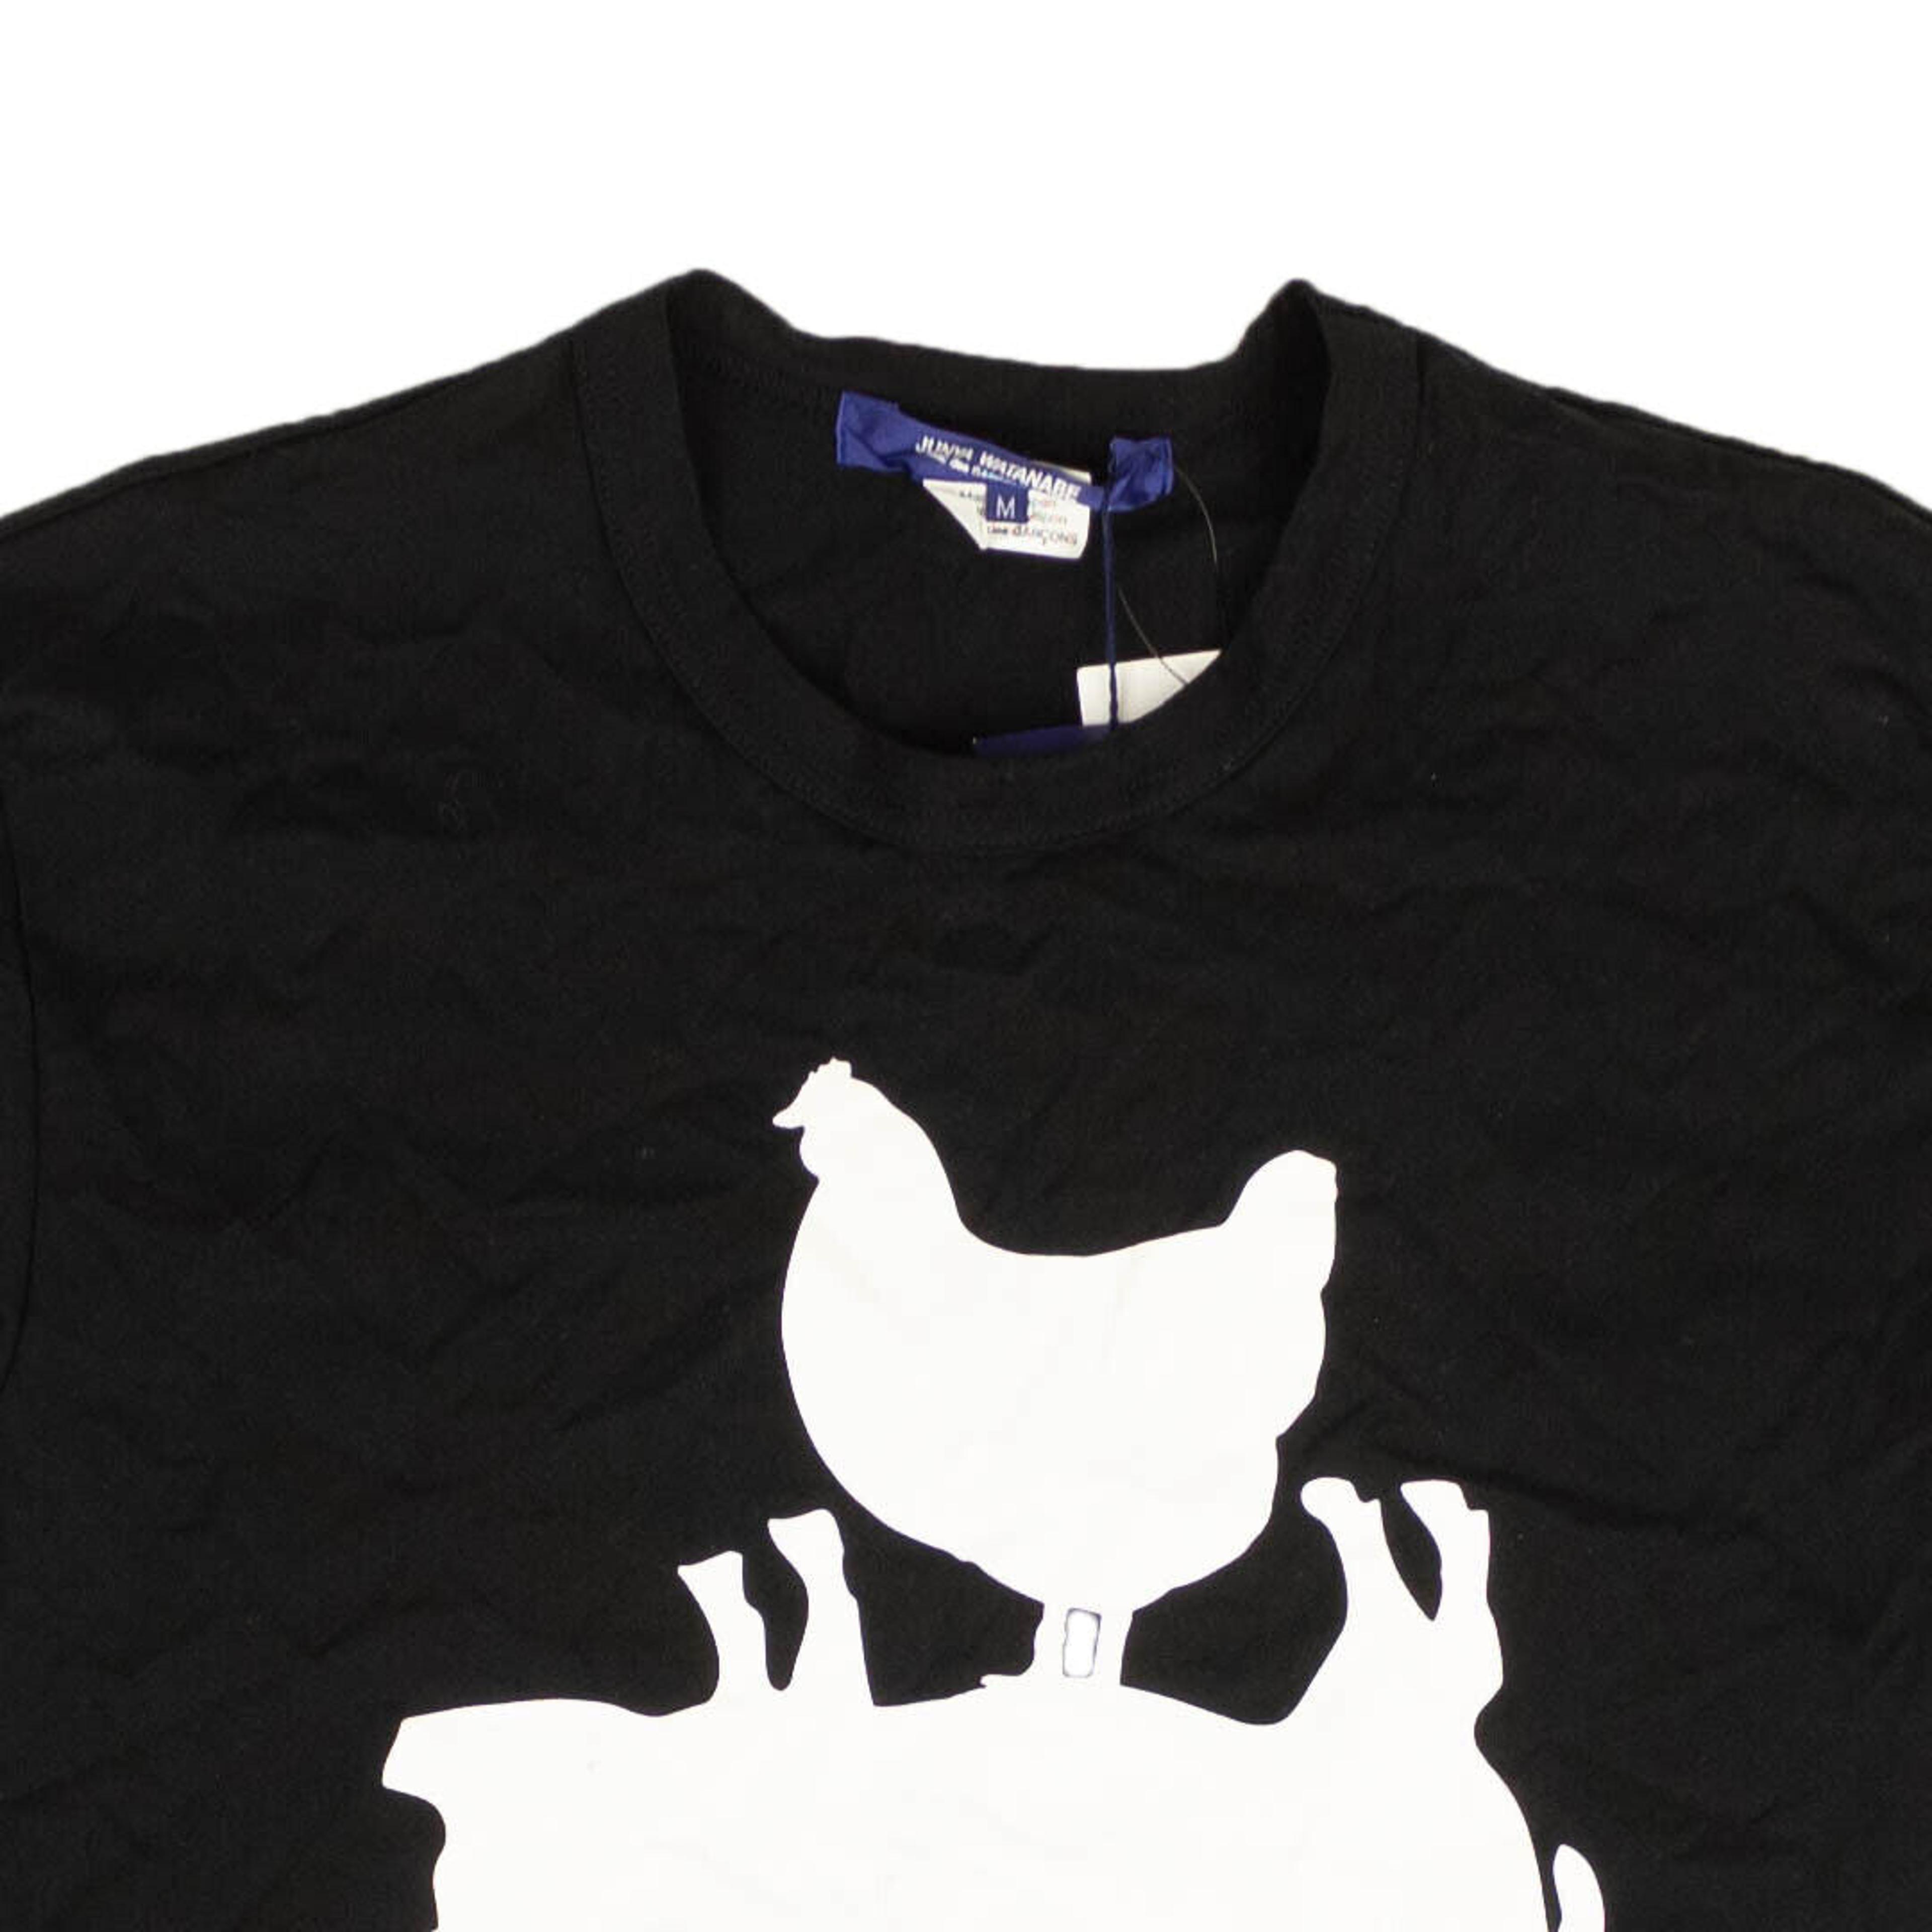 Alternate View 1 of Black Pigs Chickens T-Shirt